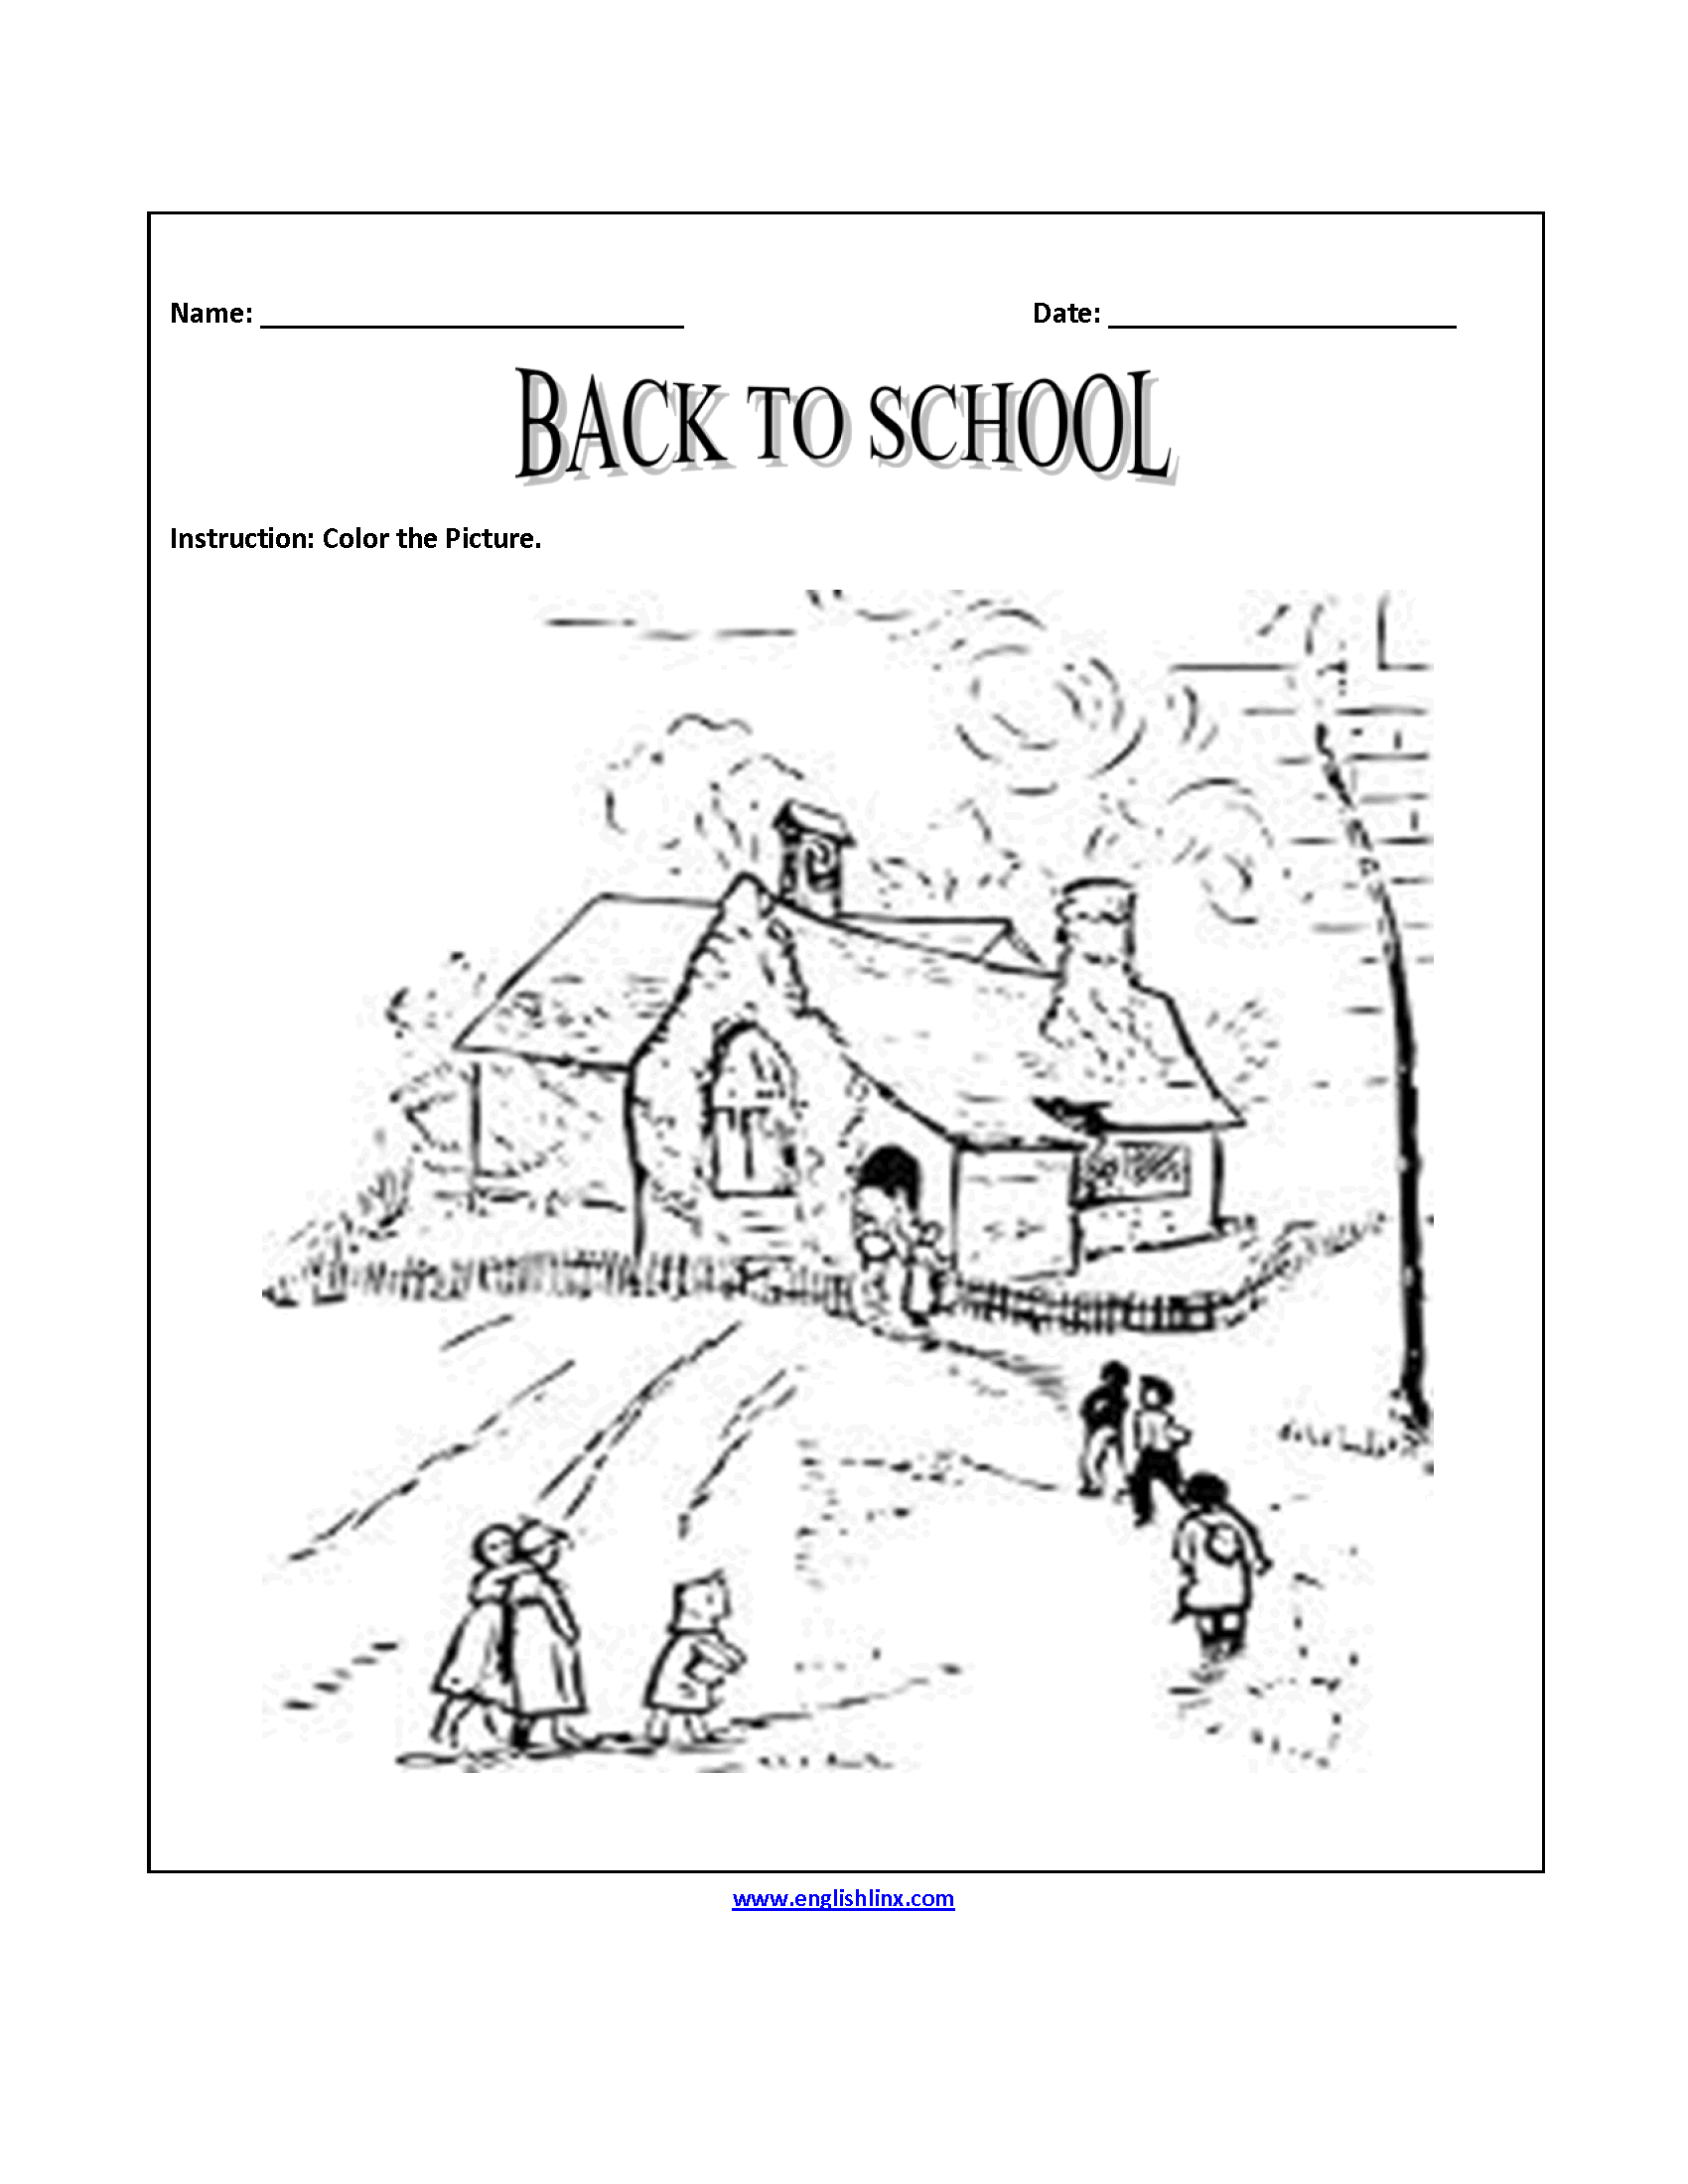 back-to-school-worksheets-back-to-school-coloring-page-worksheets